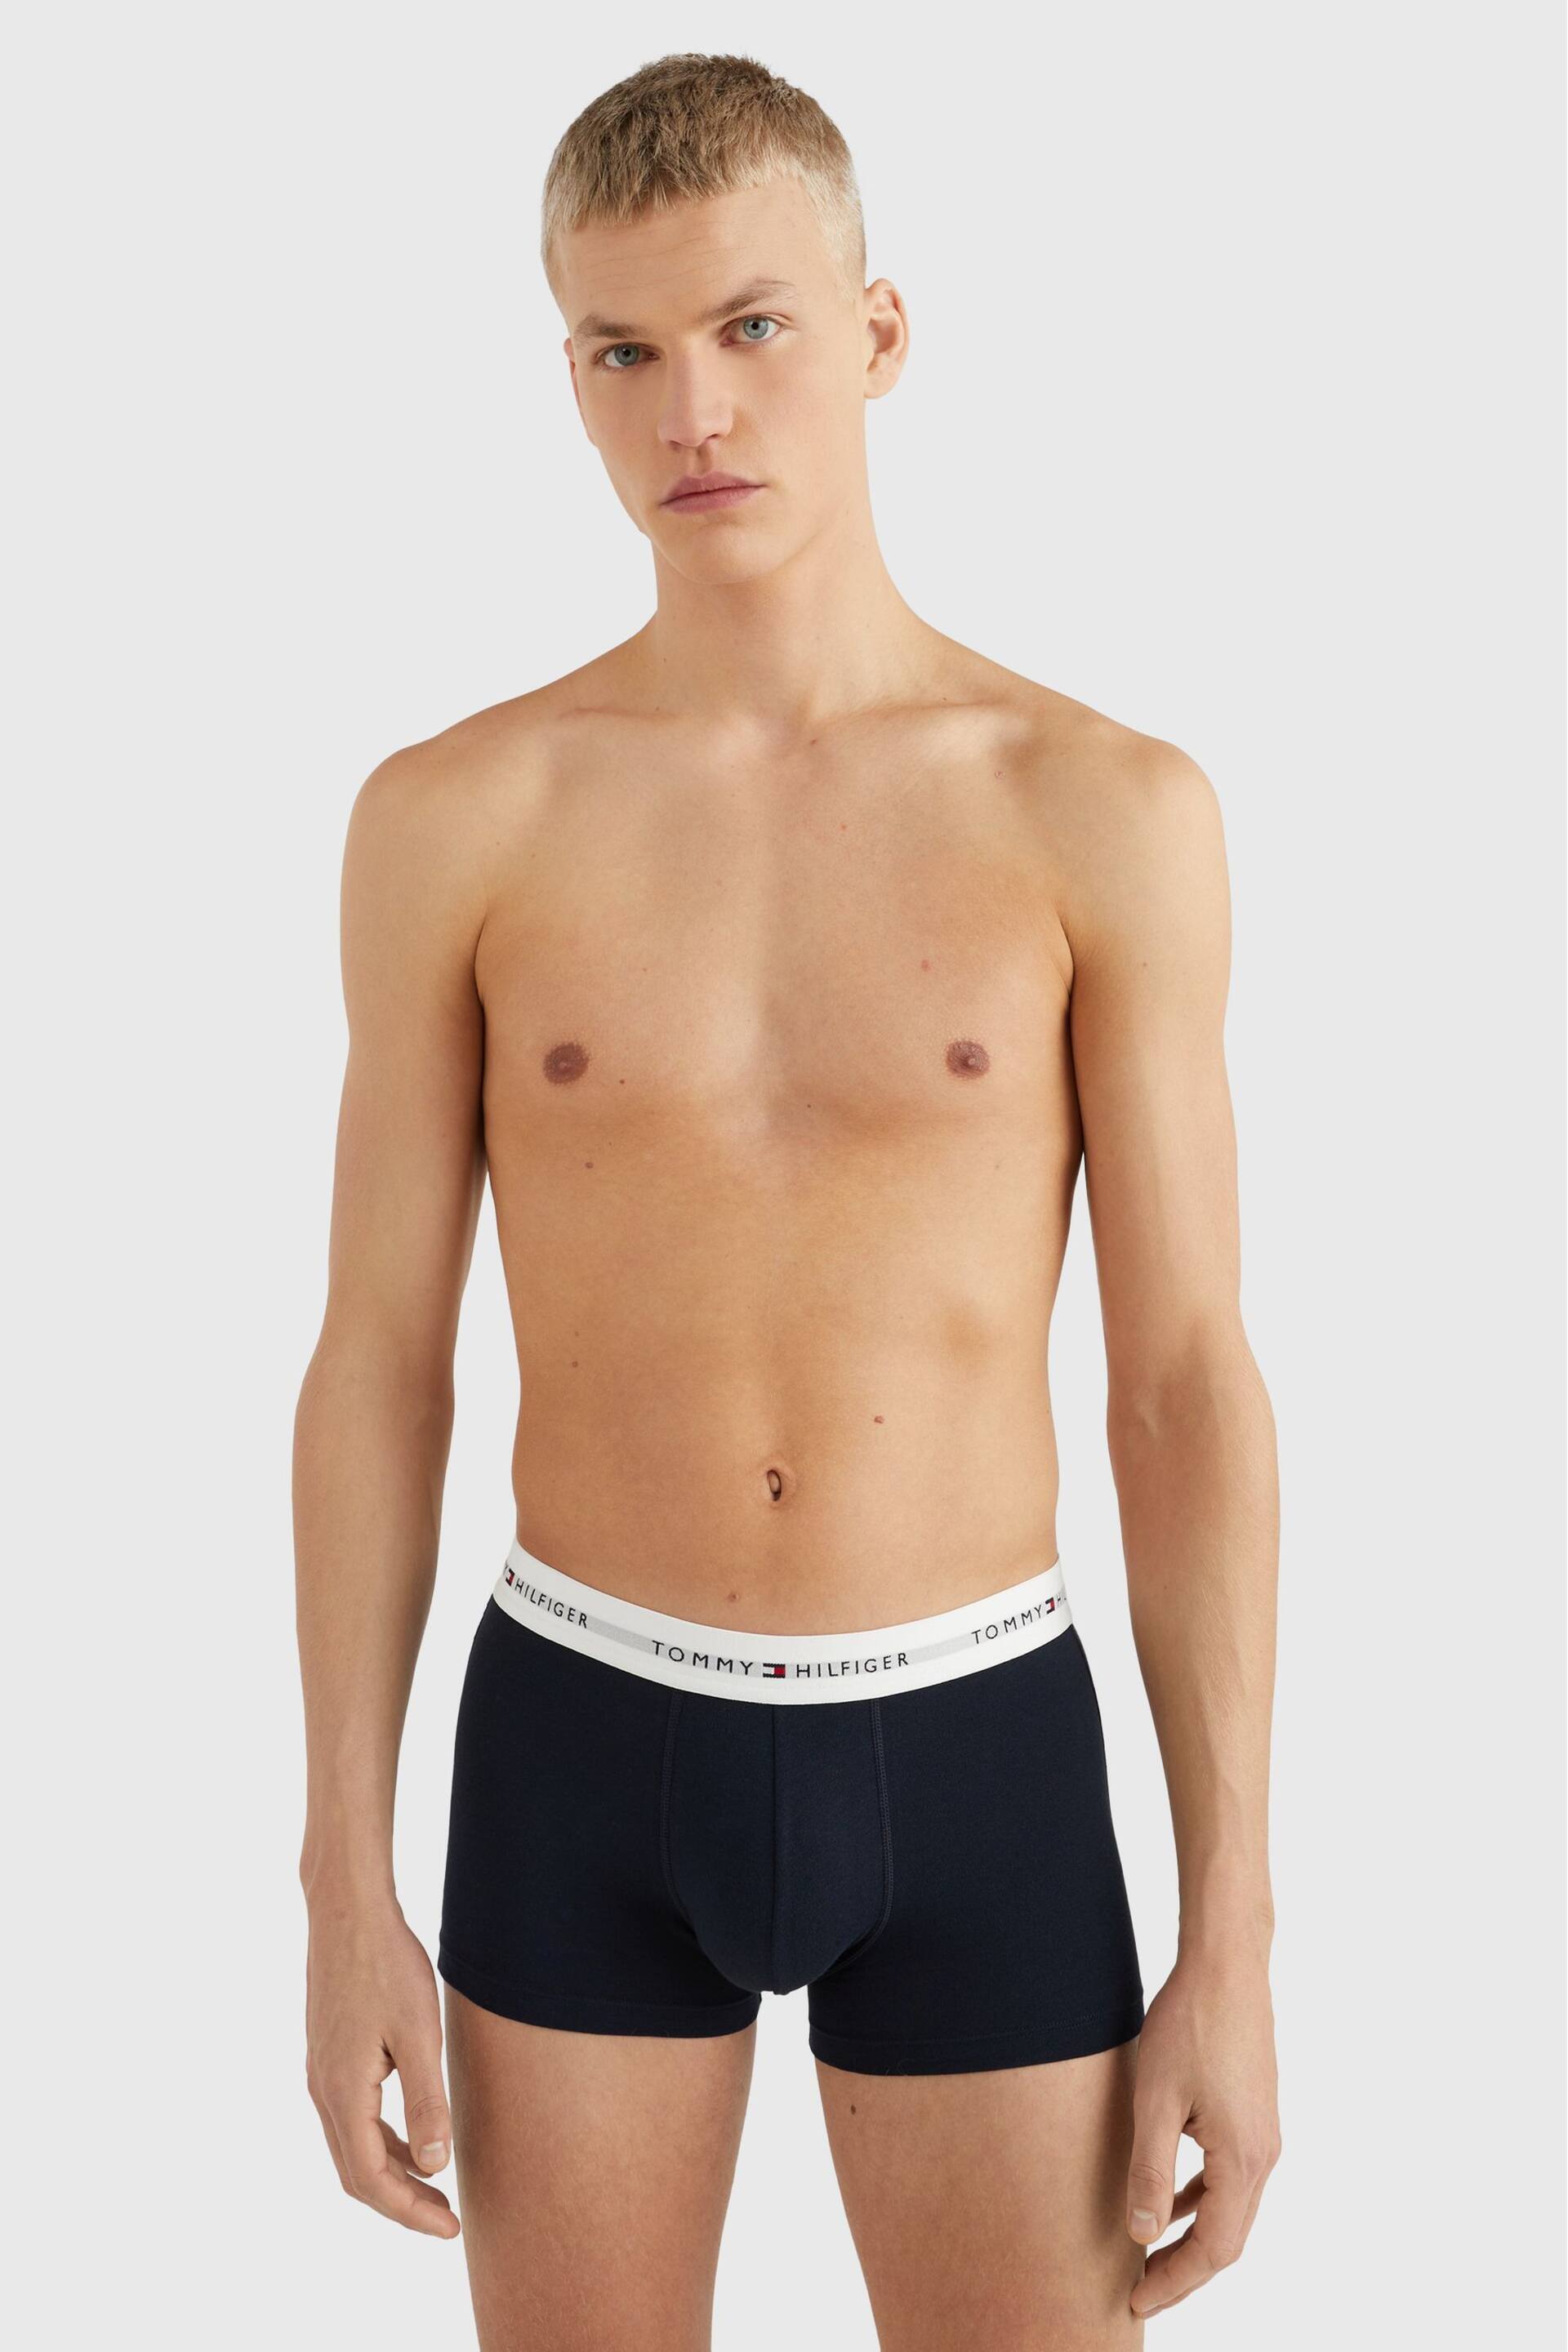 Tommy Hilfiger Blue Signature Cotton Essential Trunks 3 Pack - Image 4 of 4